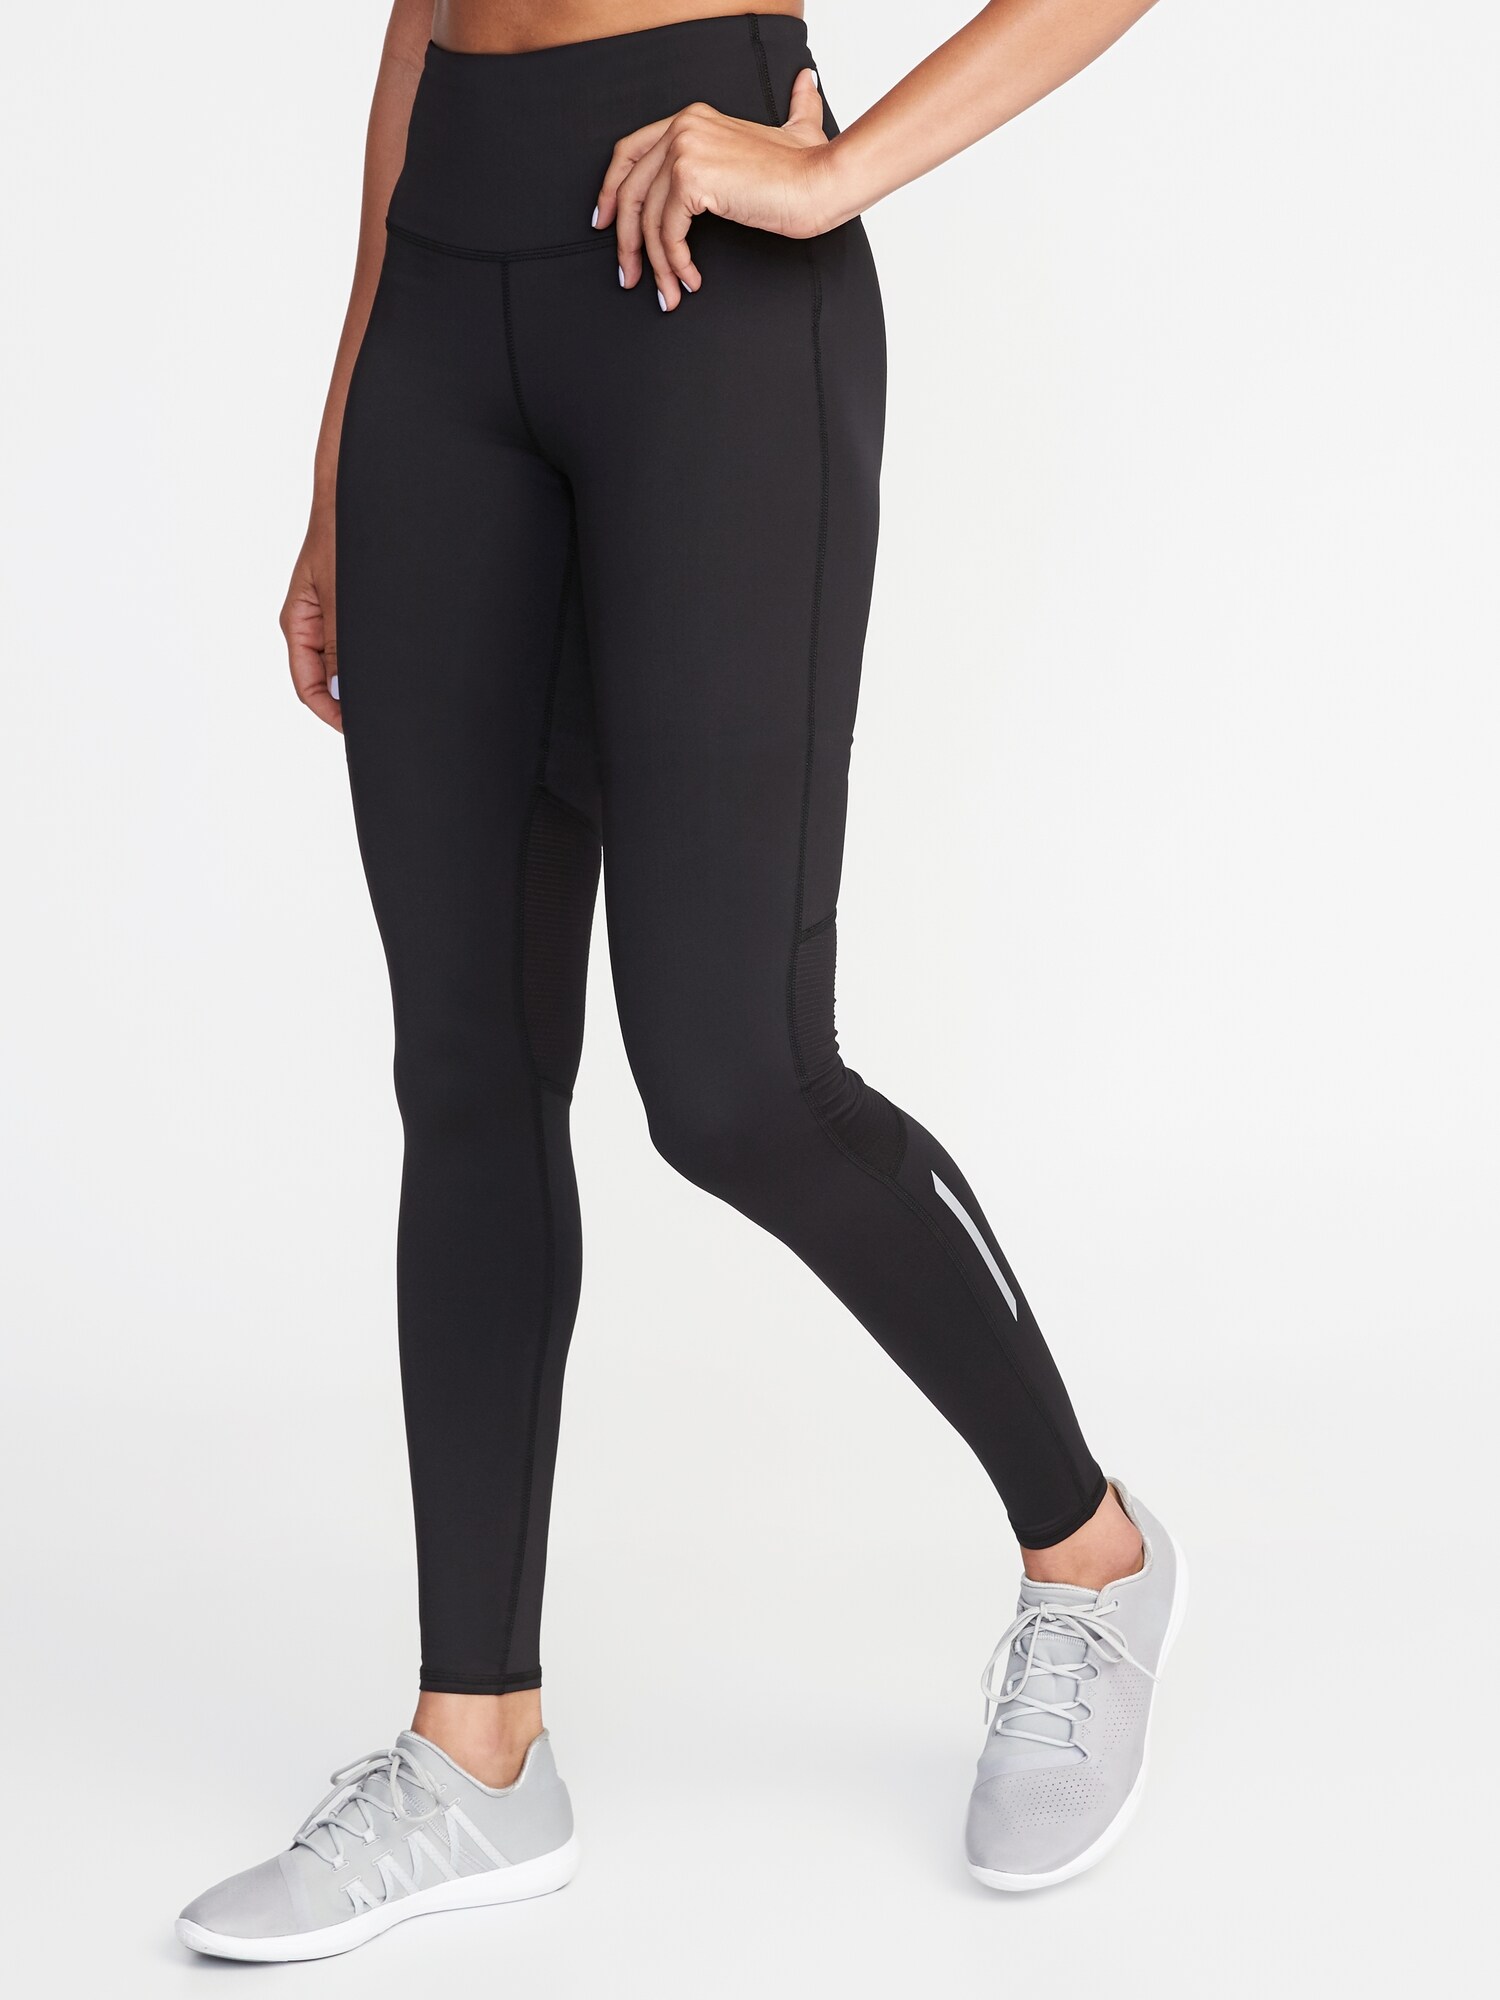 Old Navy Active Leggings Women's Black Athletic Compression Pants